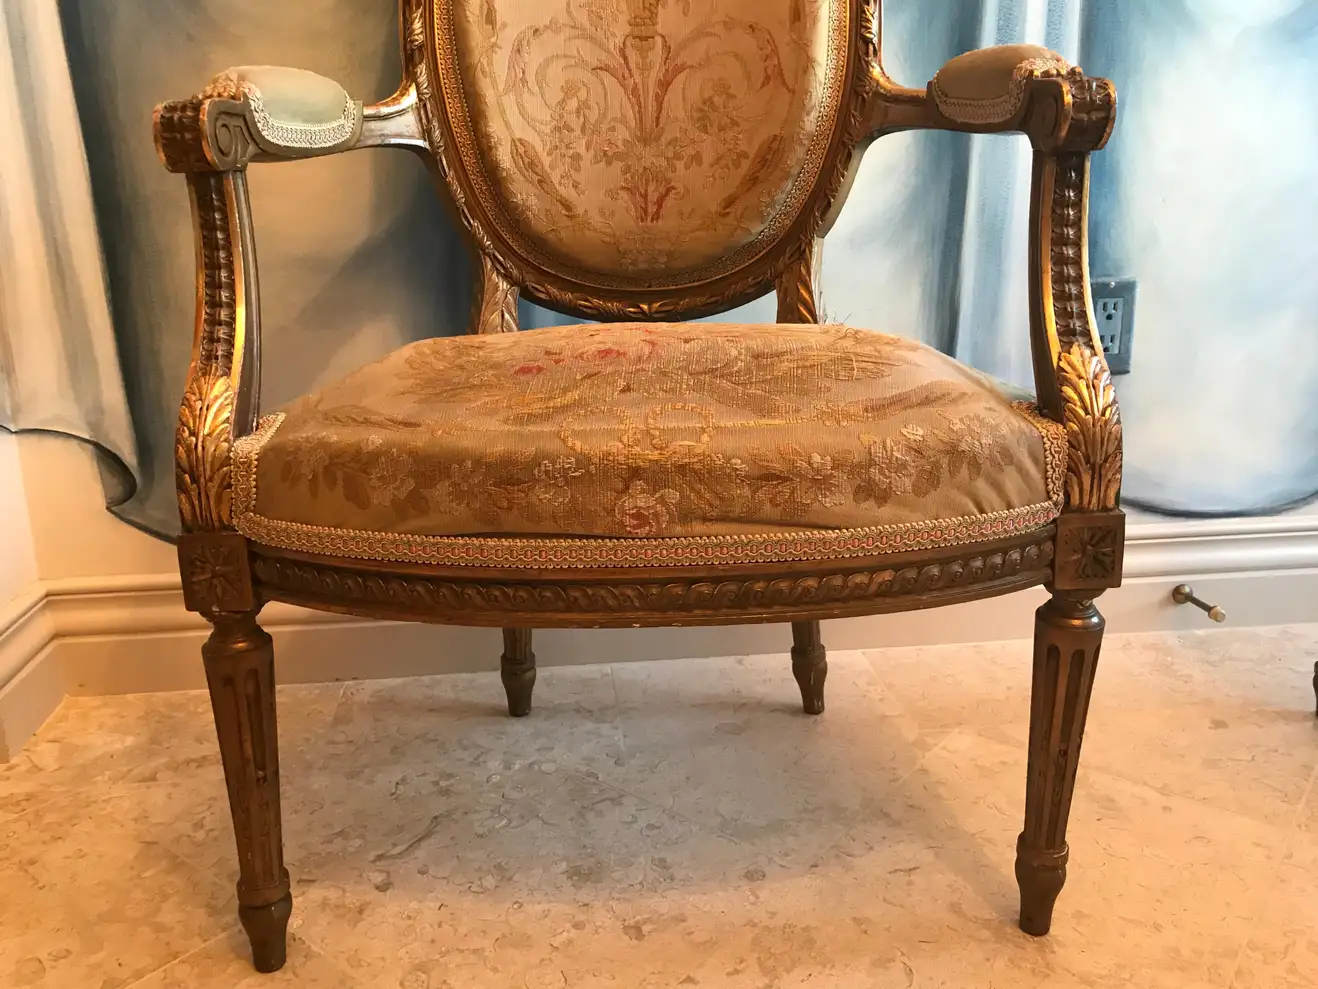 Pair of Louis XVI Style Armchairs- antique chairs for sale- Styylish